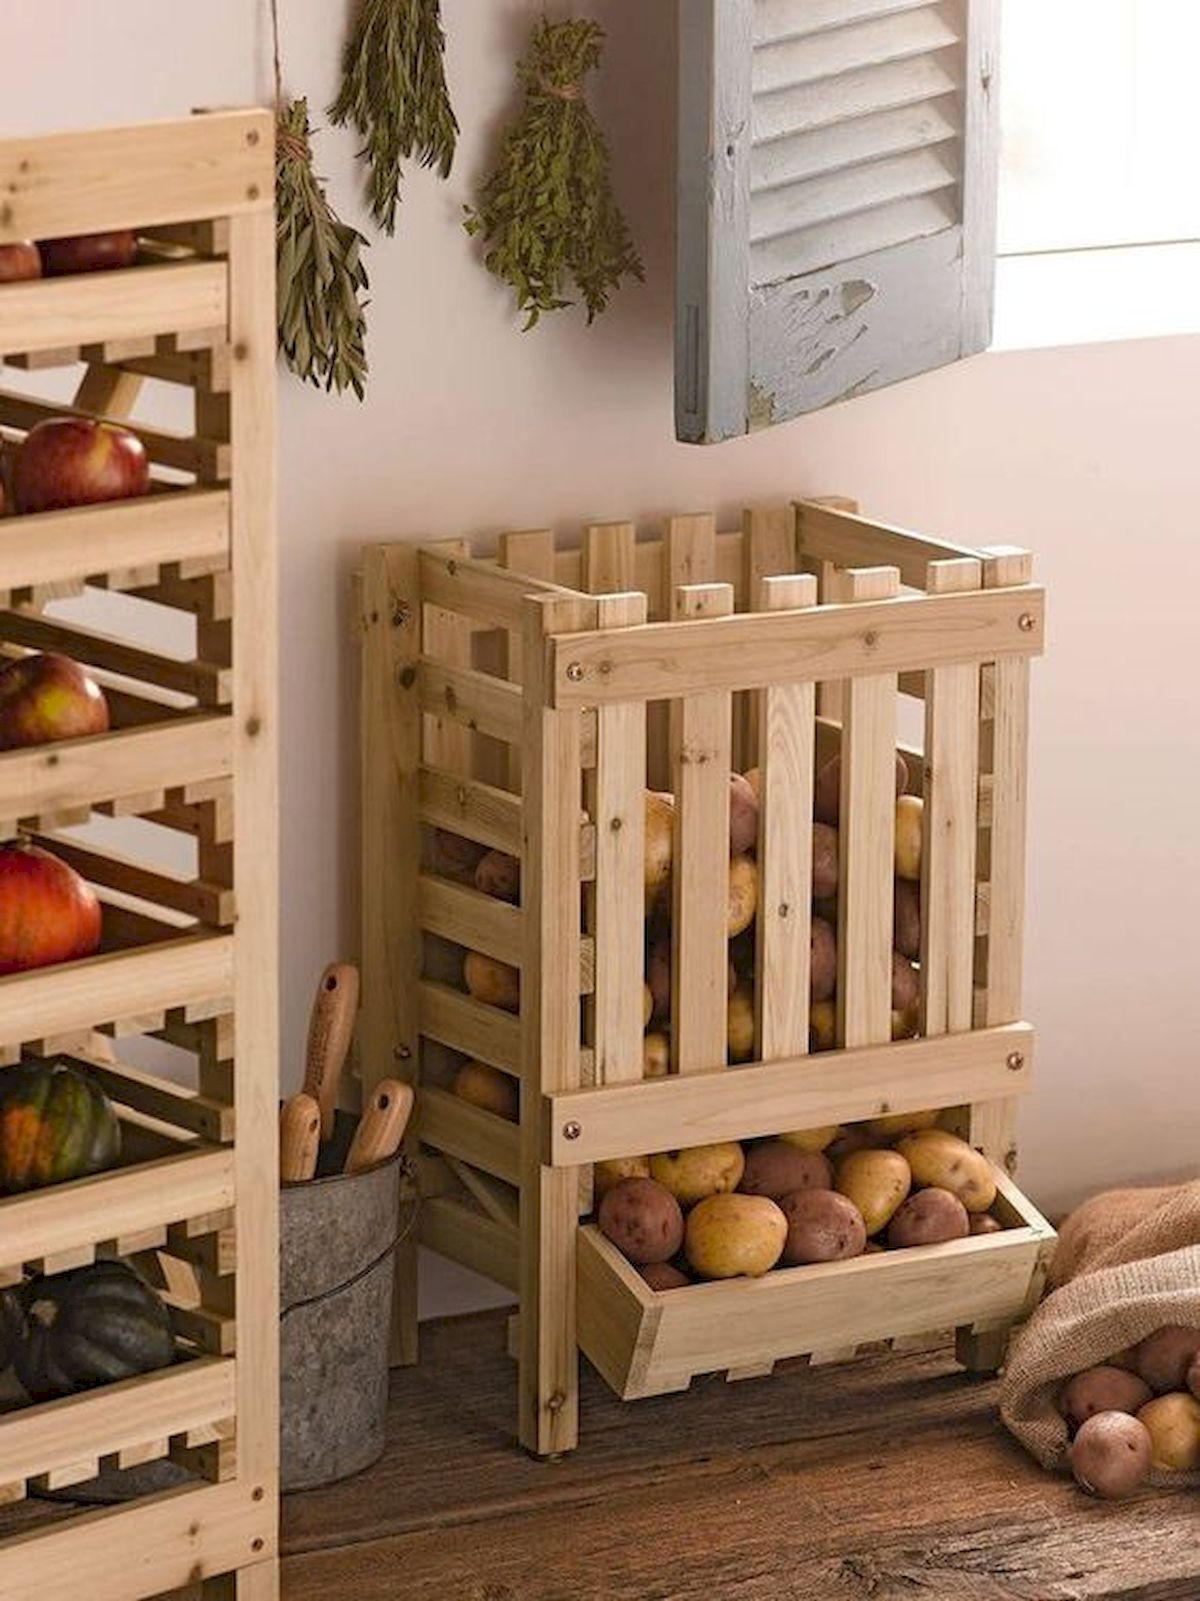 30 Creative DIY Kitchen Storage Ideas for Fruit and Vegetable (1)